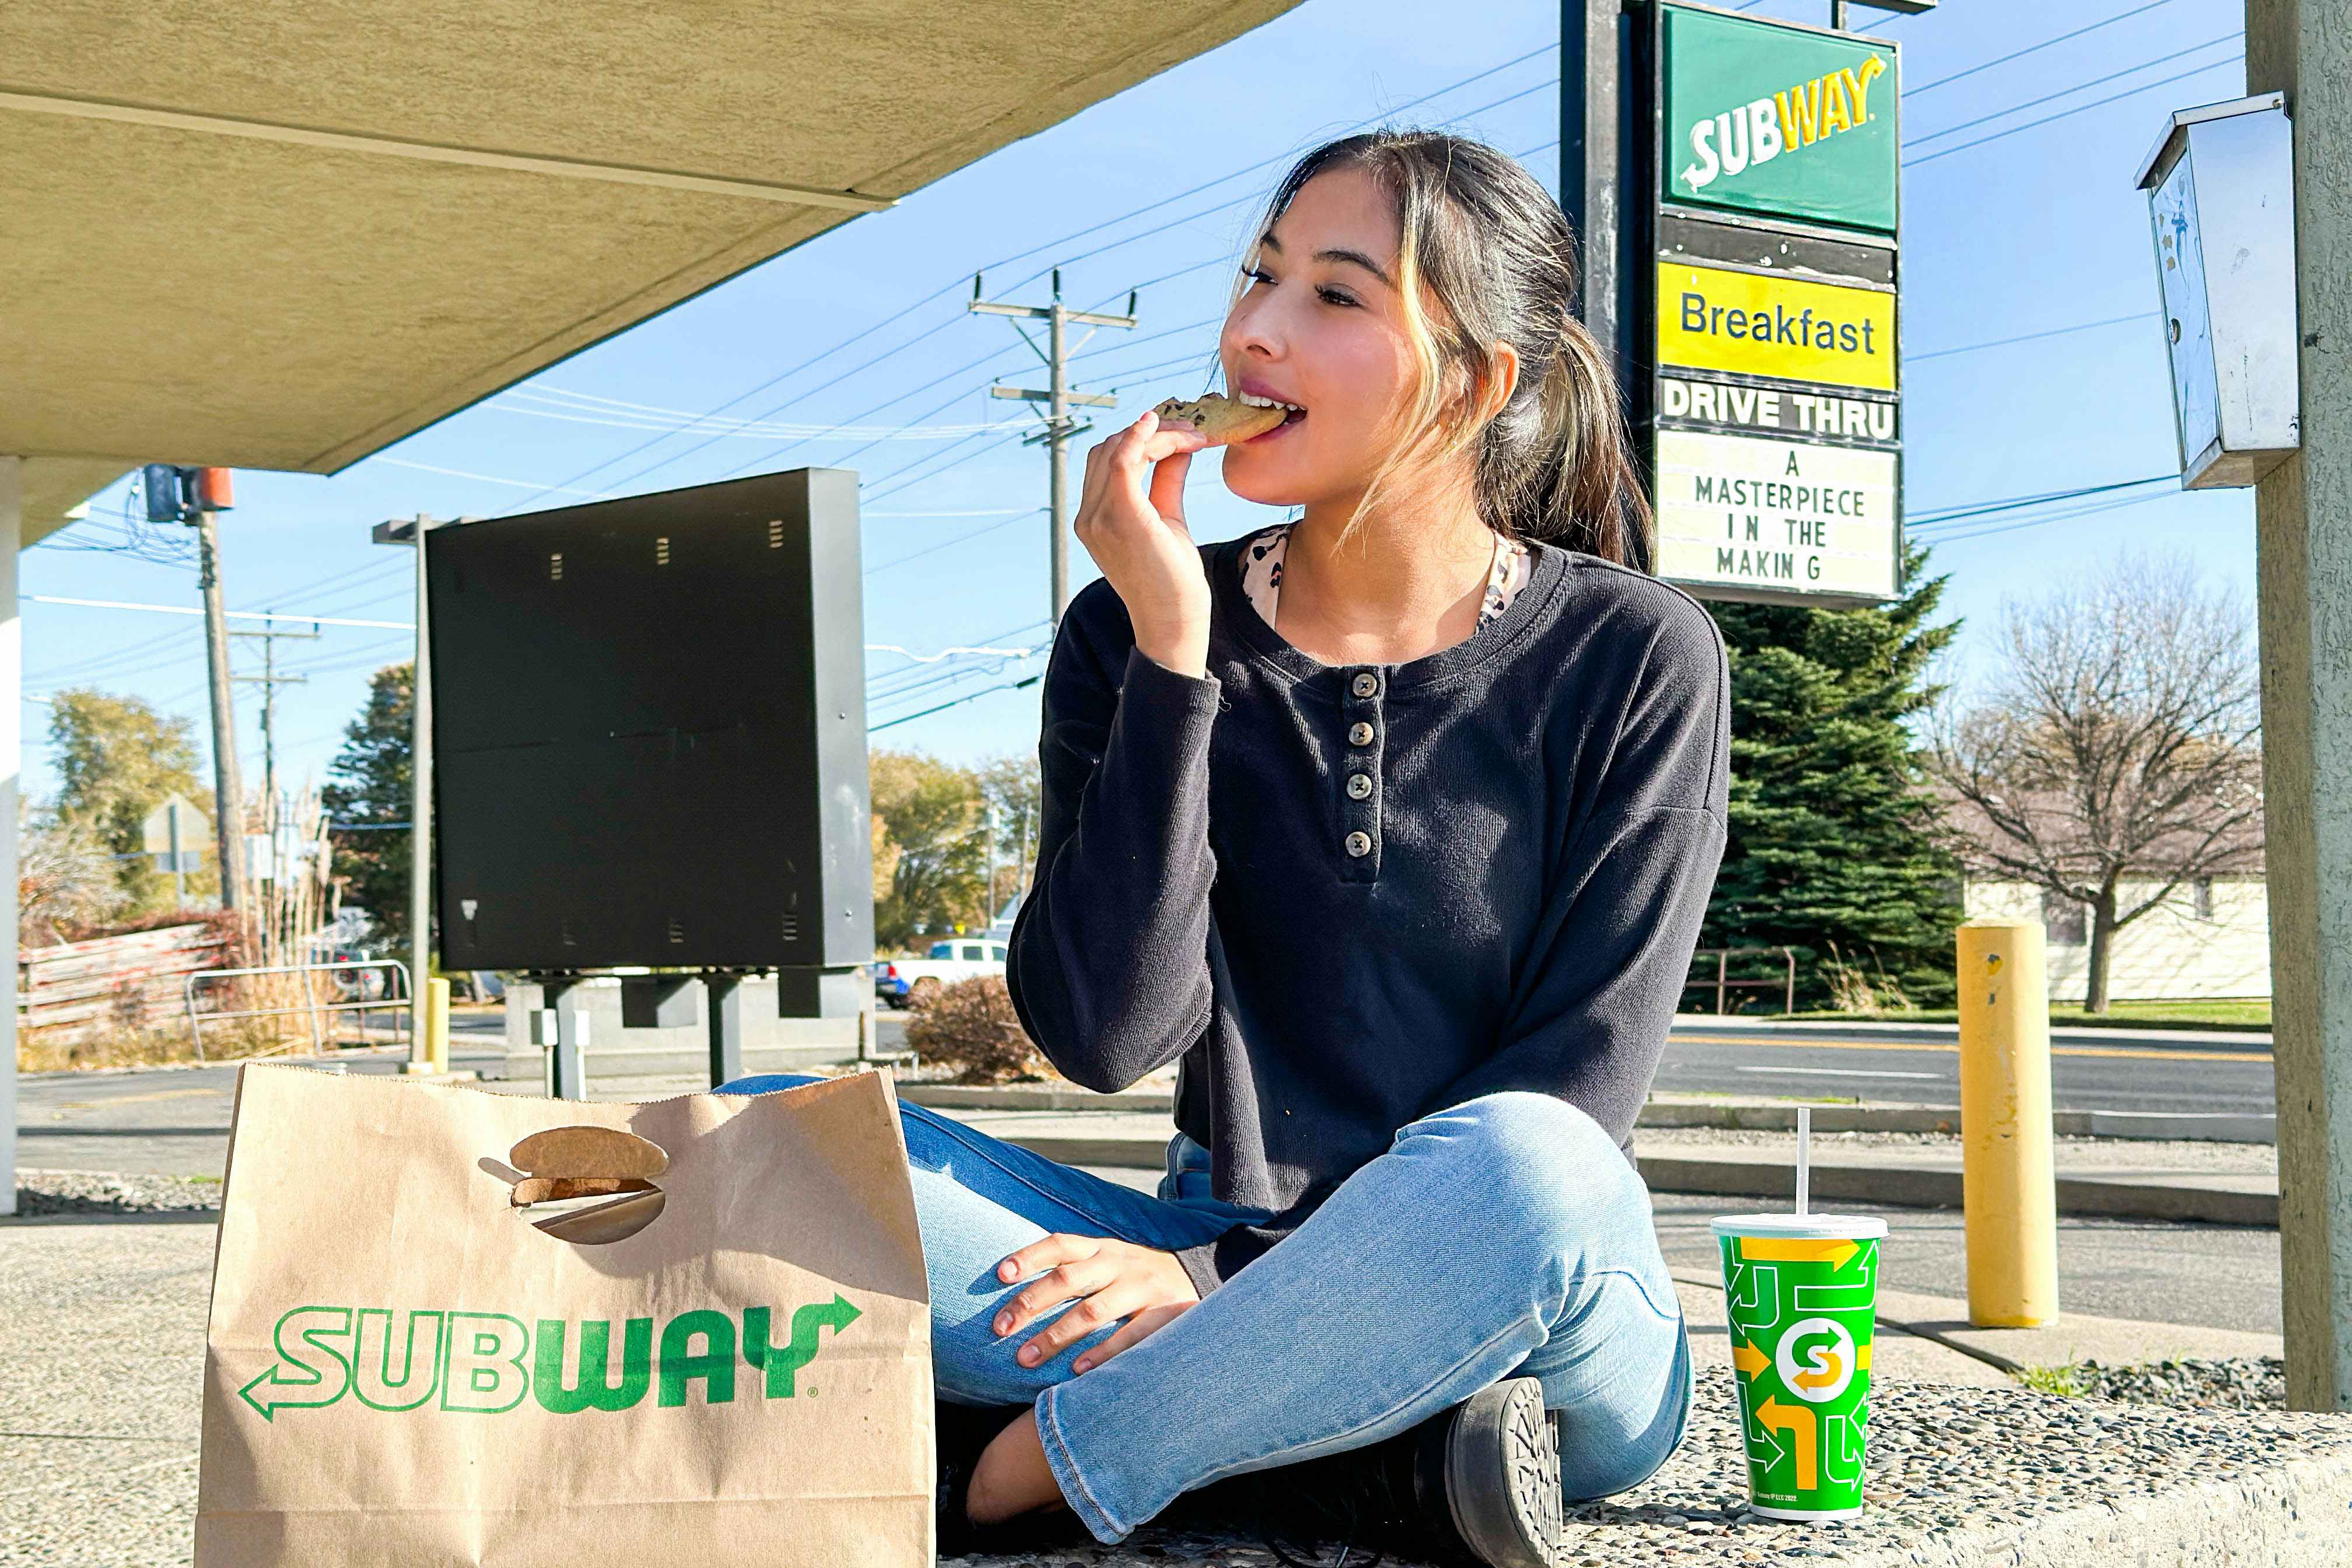 The Hottest Subway Coupon Deals - BOGO Free Footlongs & More